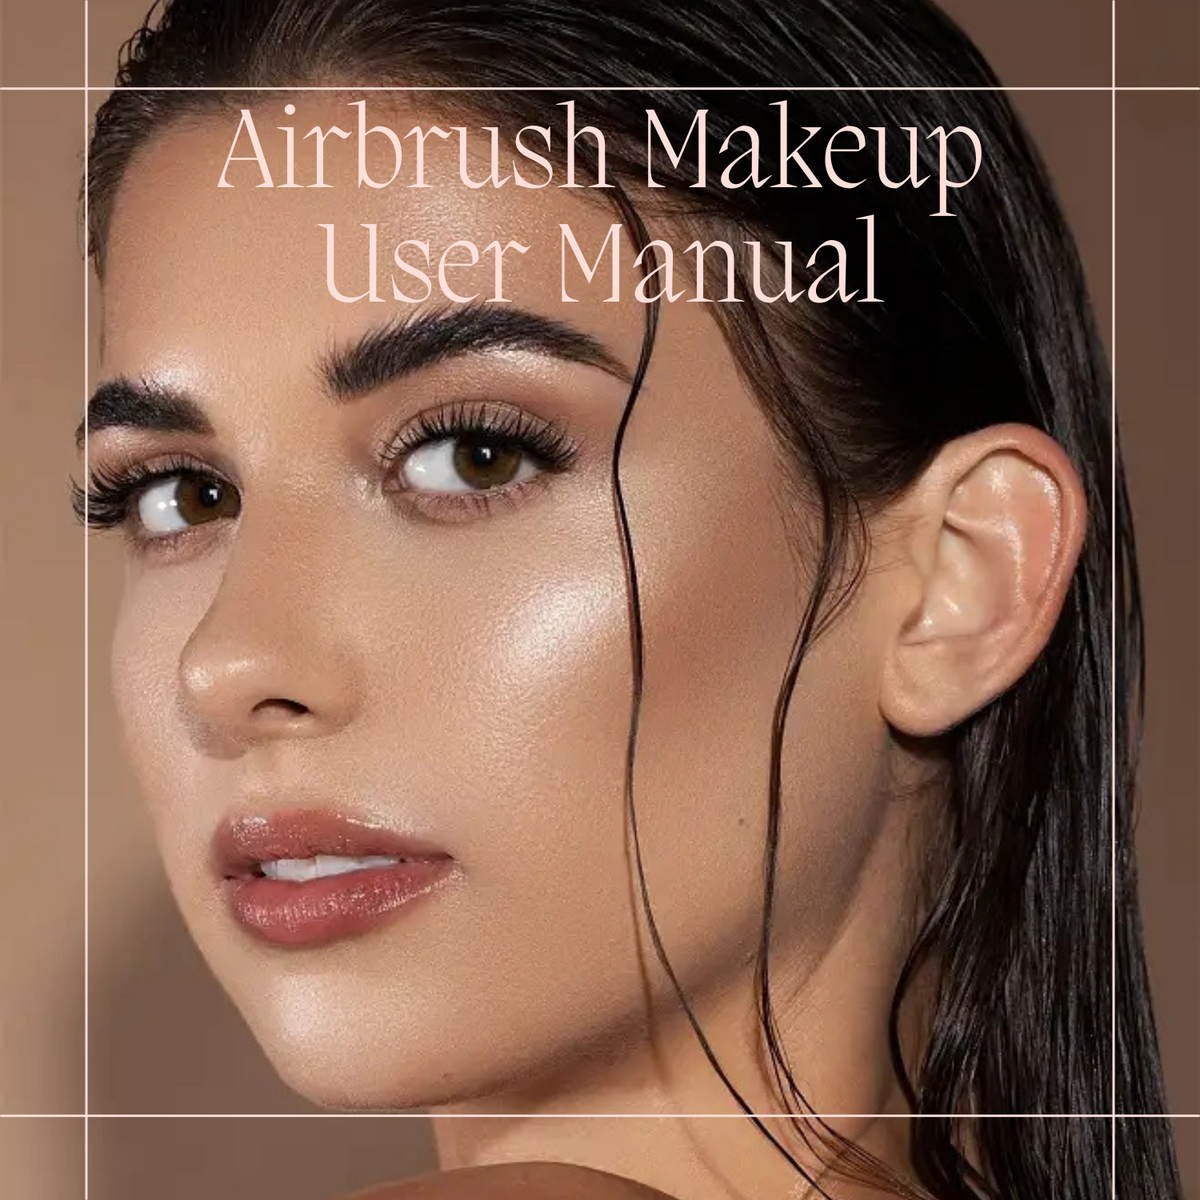 7 Ways To Check If Airbrush Makeup Is What You Need!